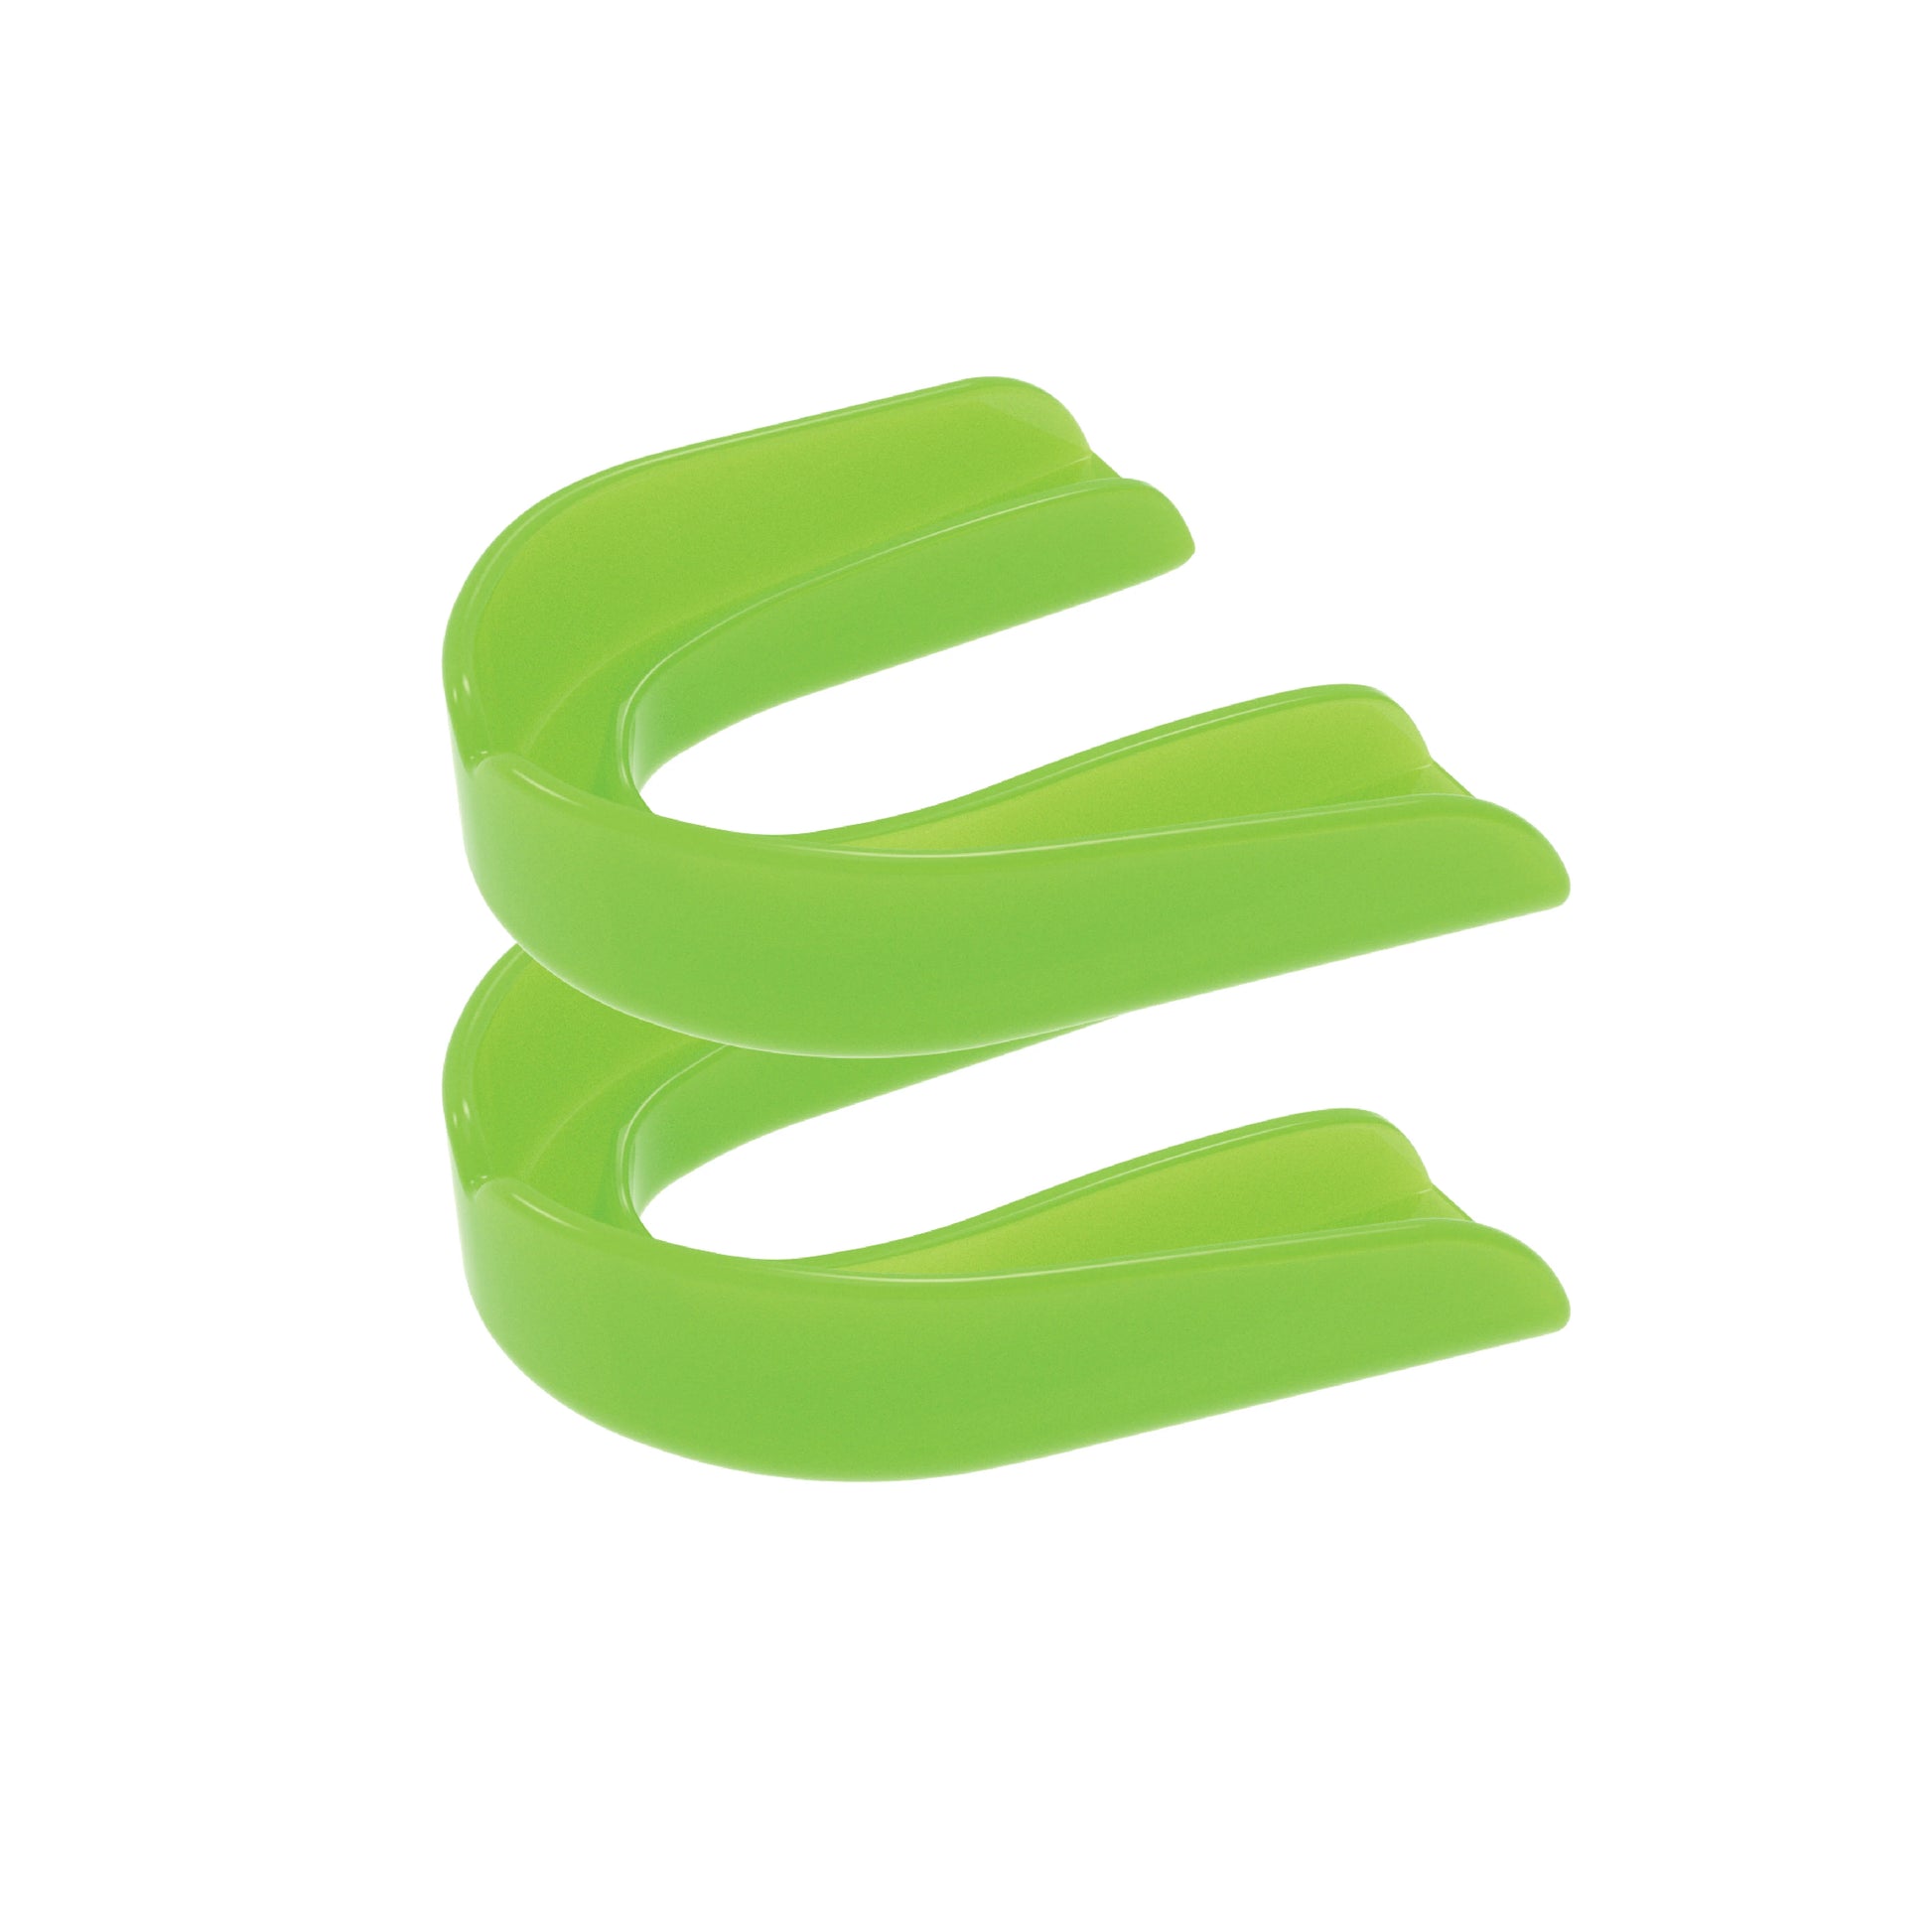 Two lime green strapless mouth guards 